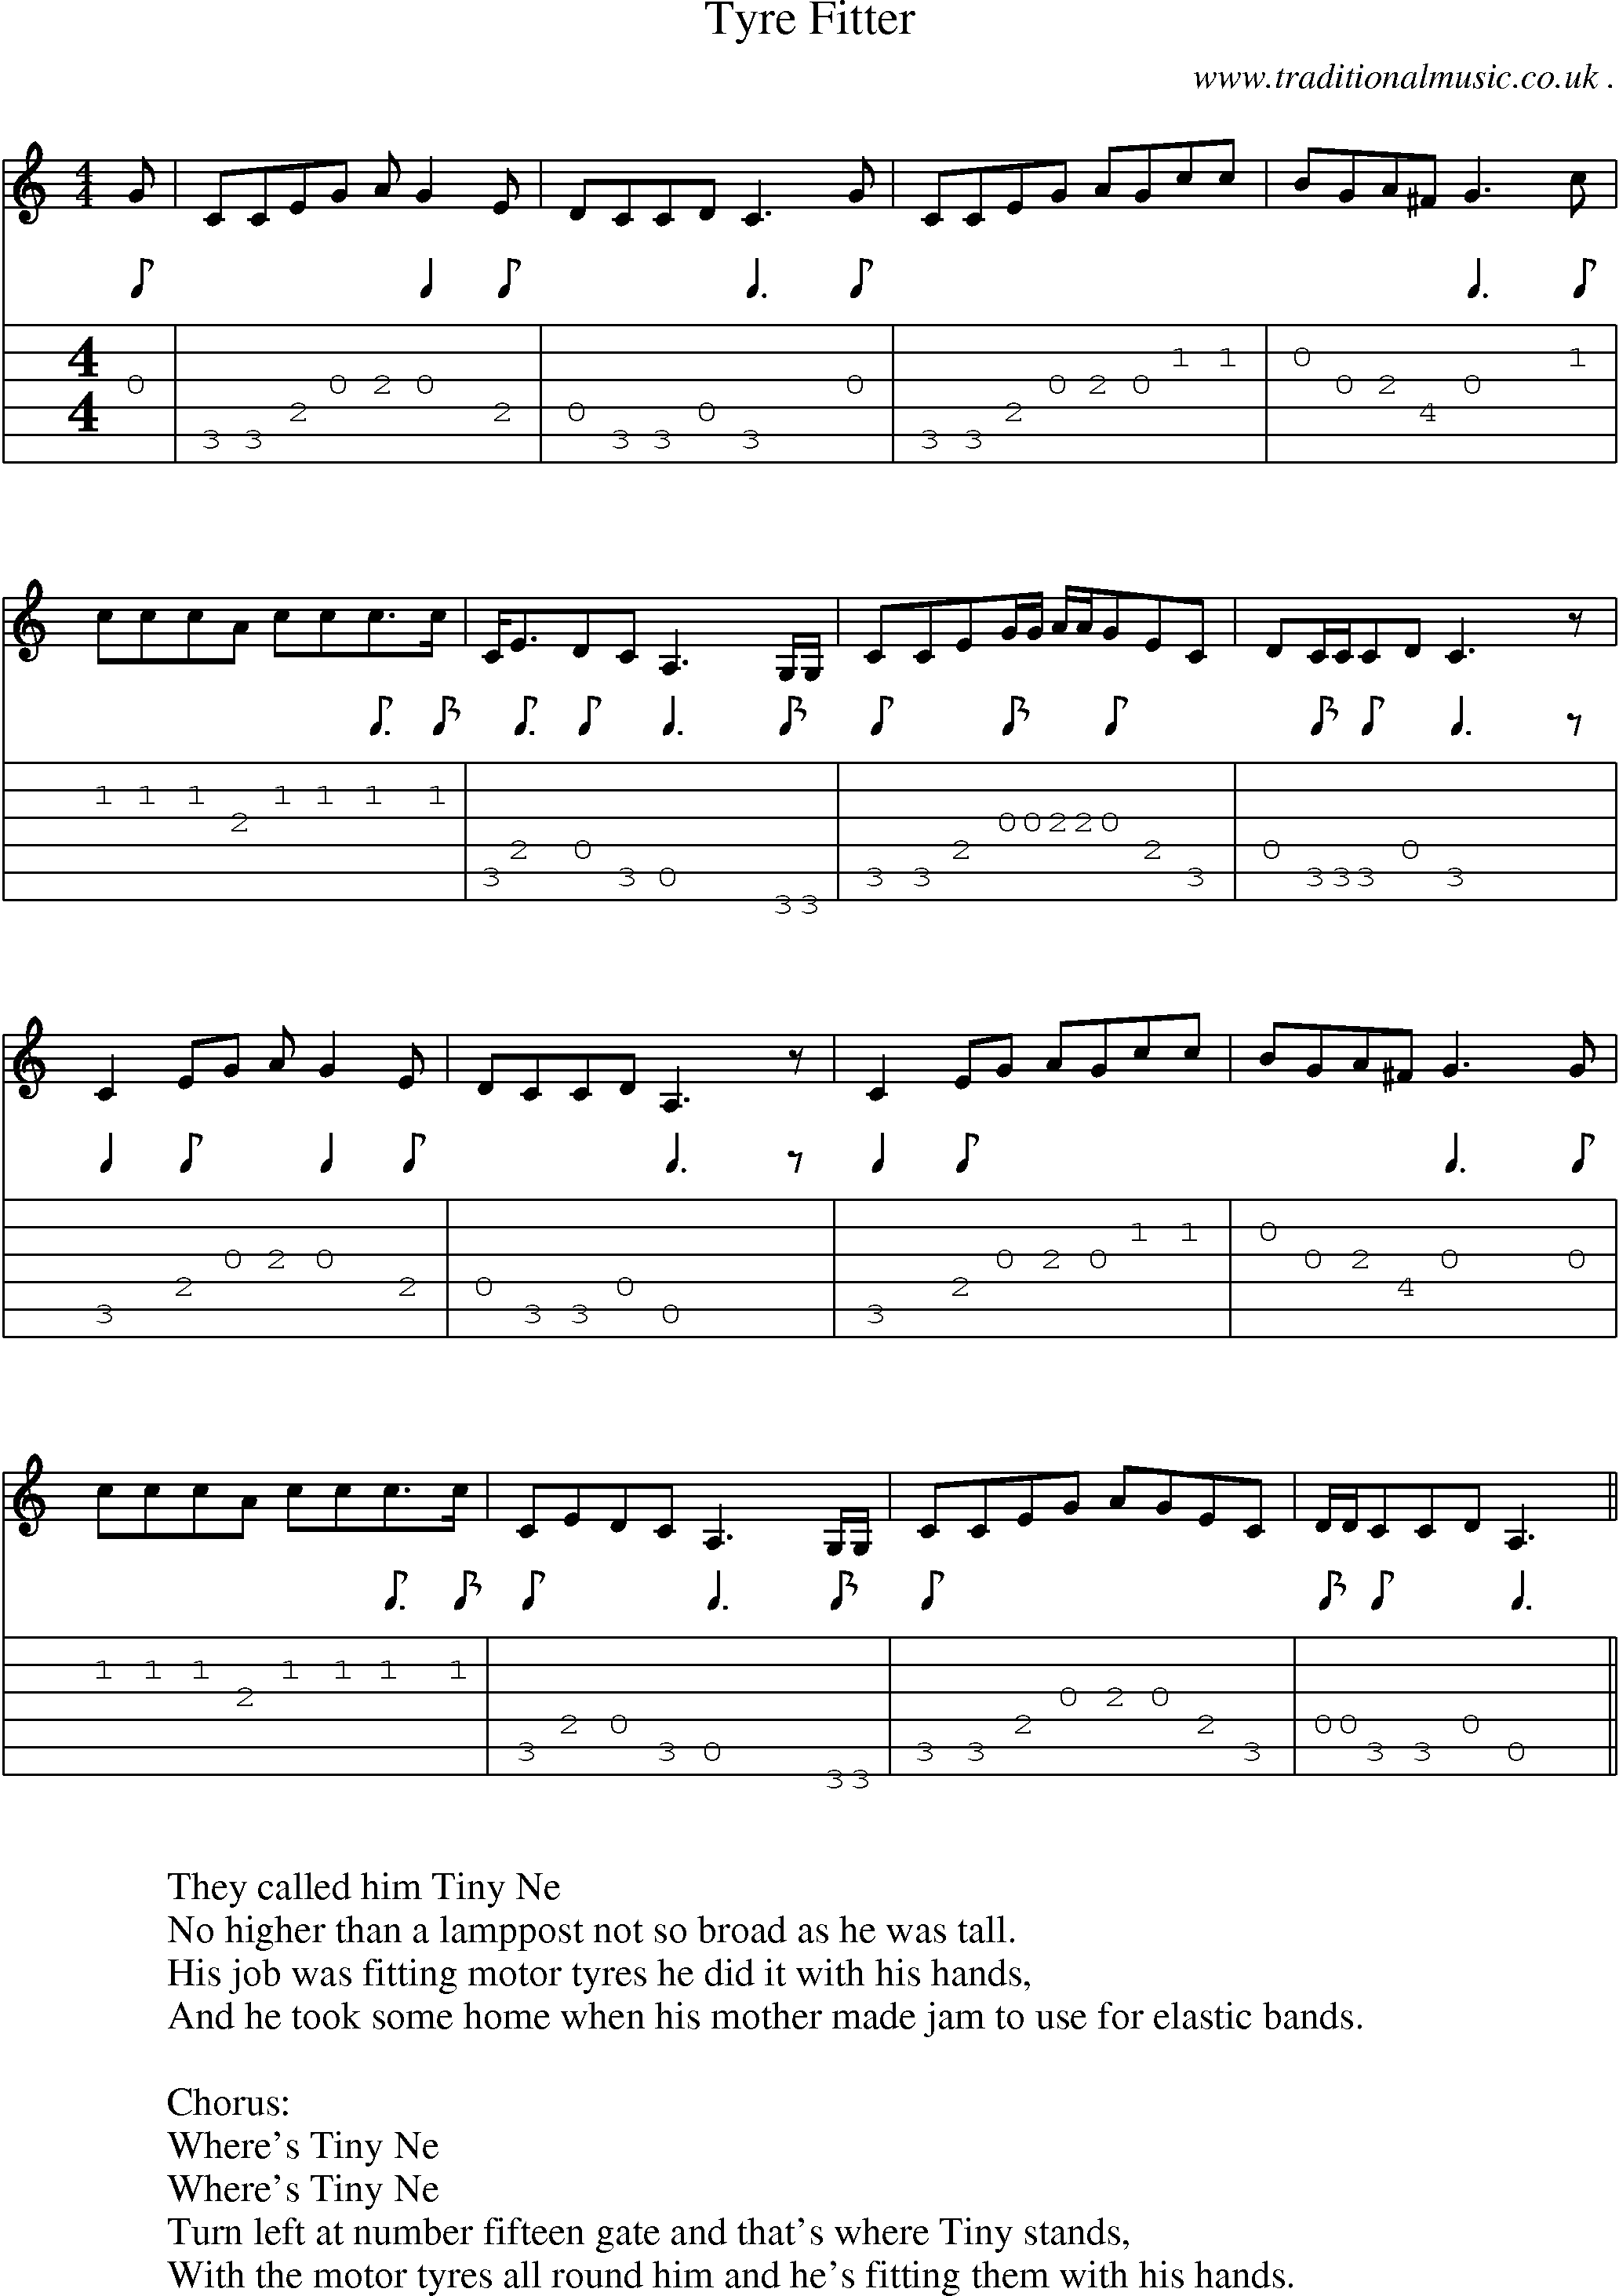 Sheet-Music and Guitar Tabs for Tyre Fitter